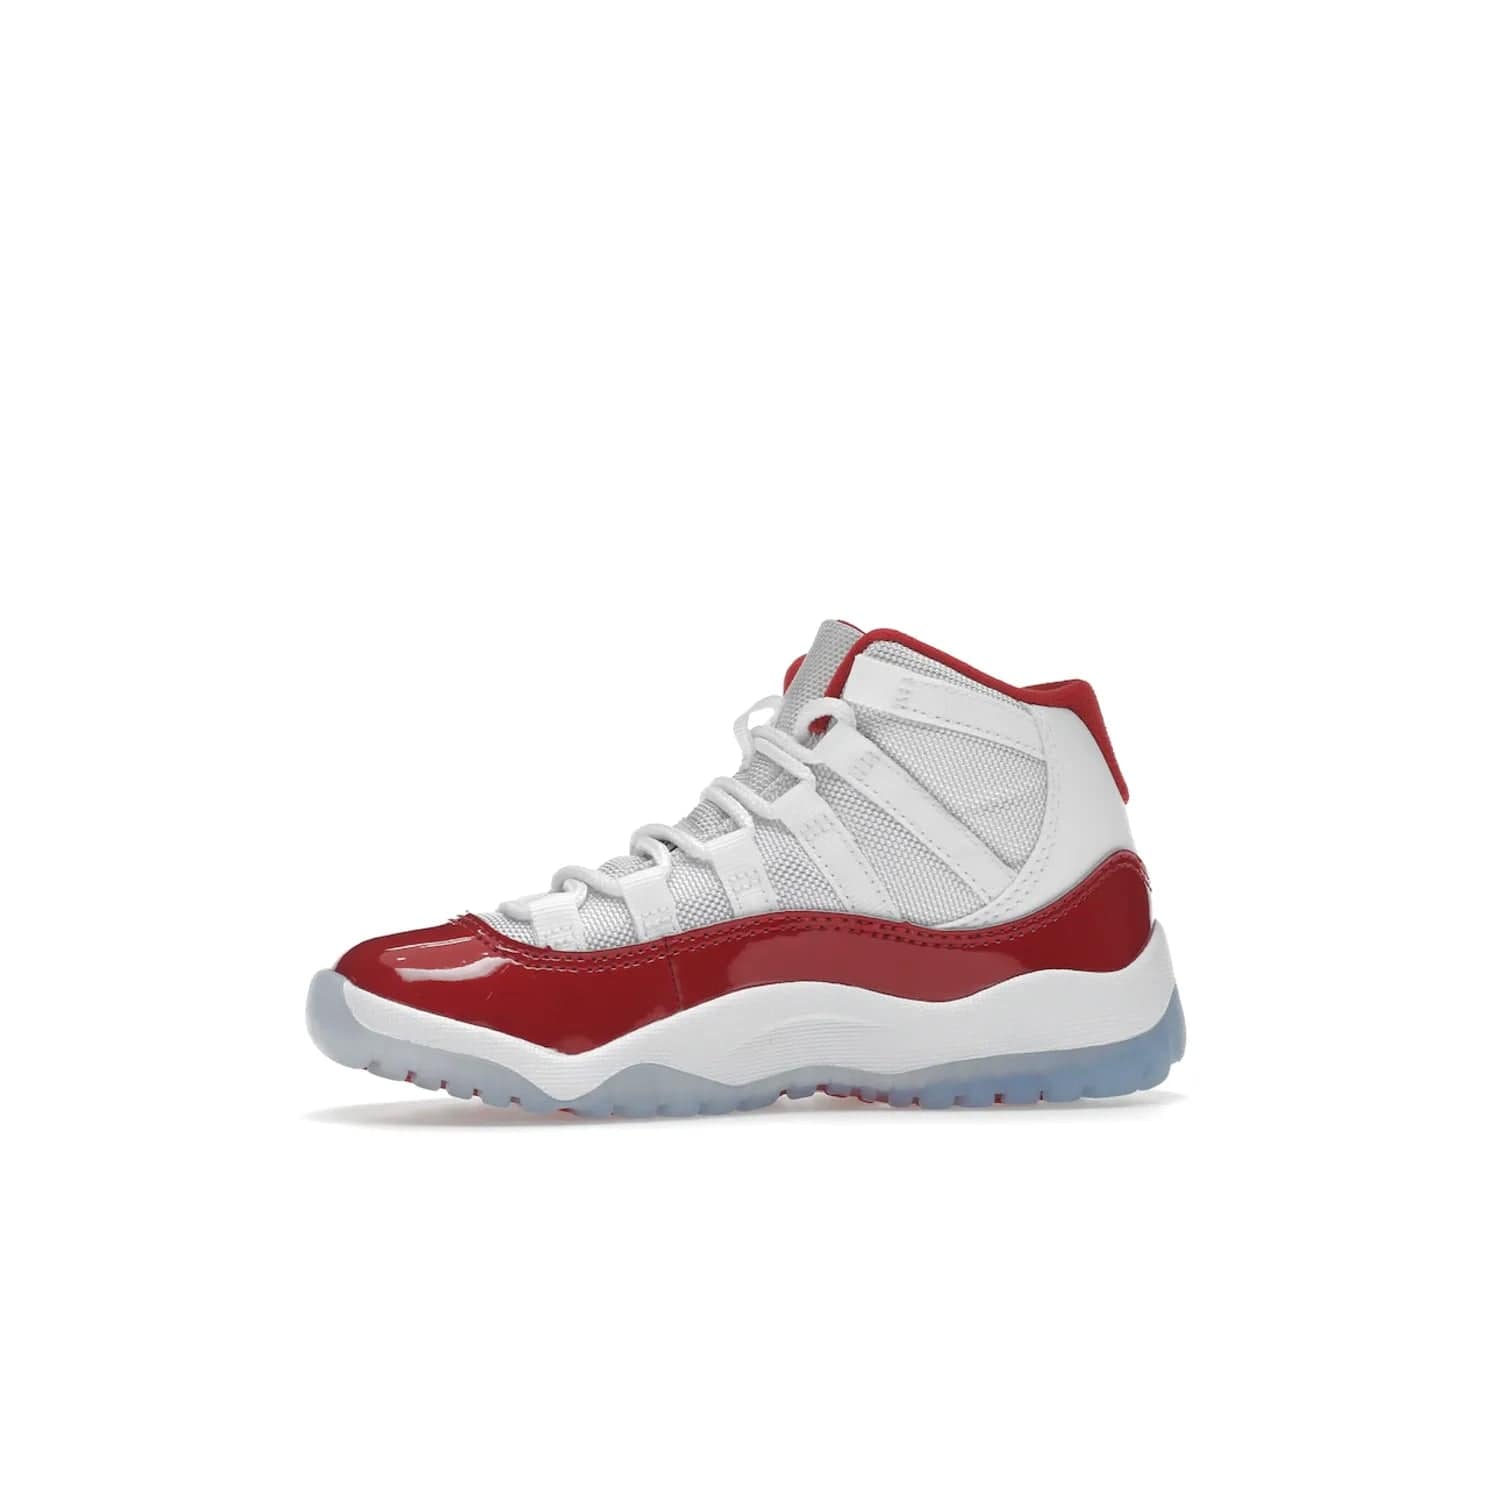 Jordan 11 Retro Cherry (2022) (PS) - Image 18 - Only at www.BallersClubKickz.com - An iconic silhouette with a timeless look, the Air Jordan 11 Retro Cherry 2022 PS features a crisp White, Varsity Red and Black colorway. The upper is made of ballistic mesh, a red patent leather mudguard, '23' branding and white Phylon midsole. Get optimal cushioning and comfort on December 10th, 2022. Don't miss out.